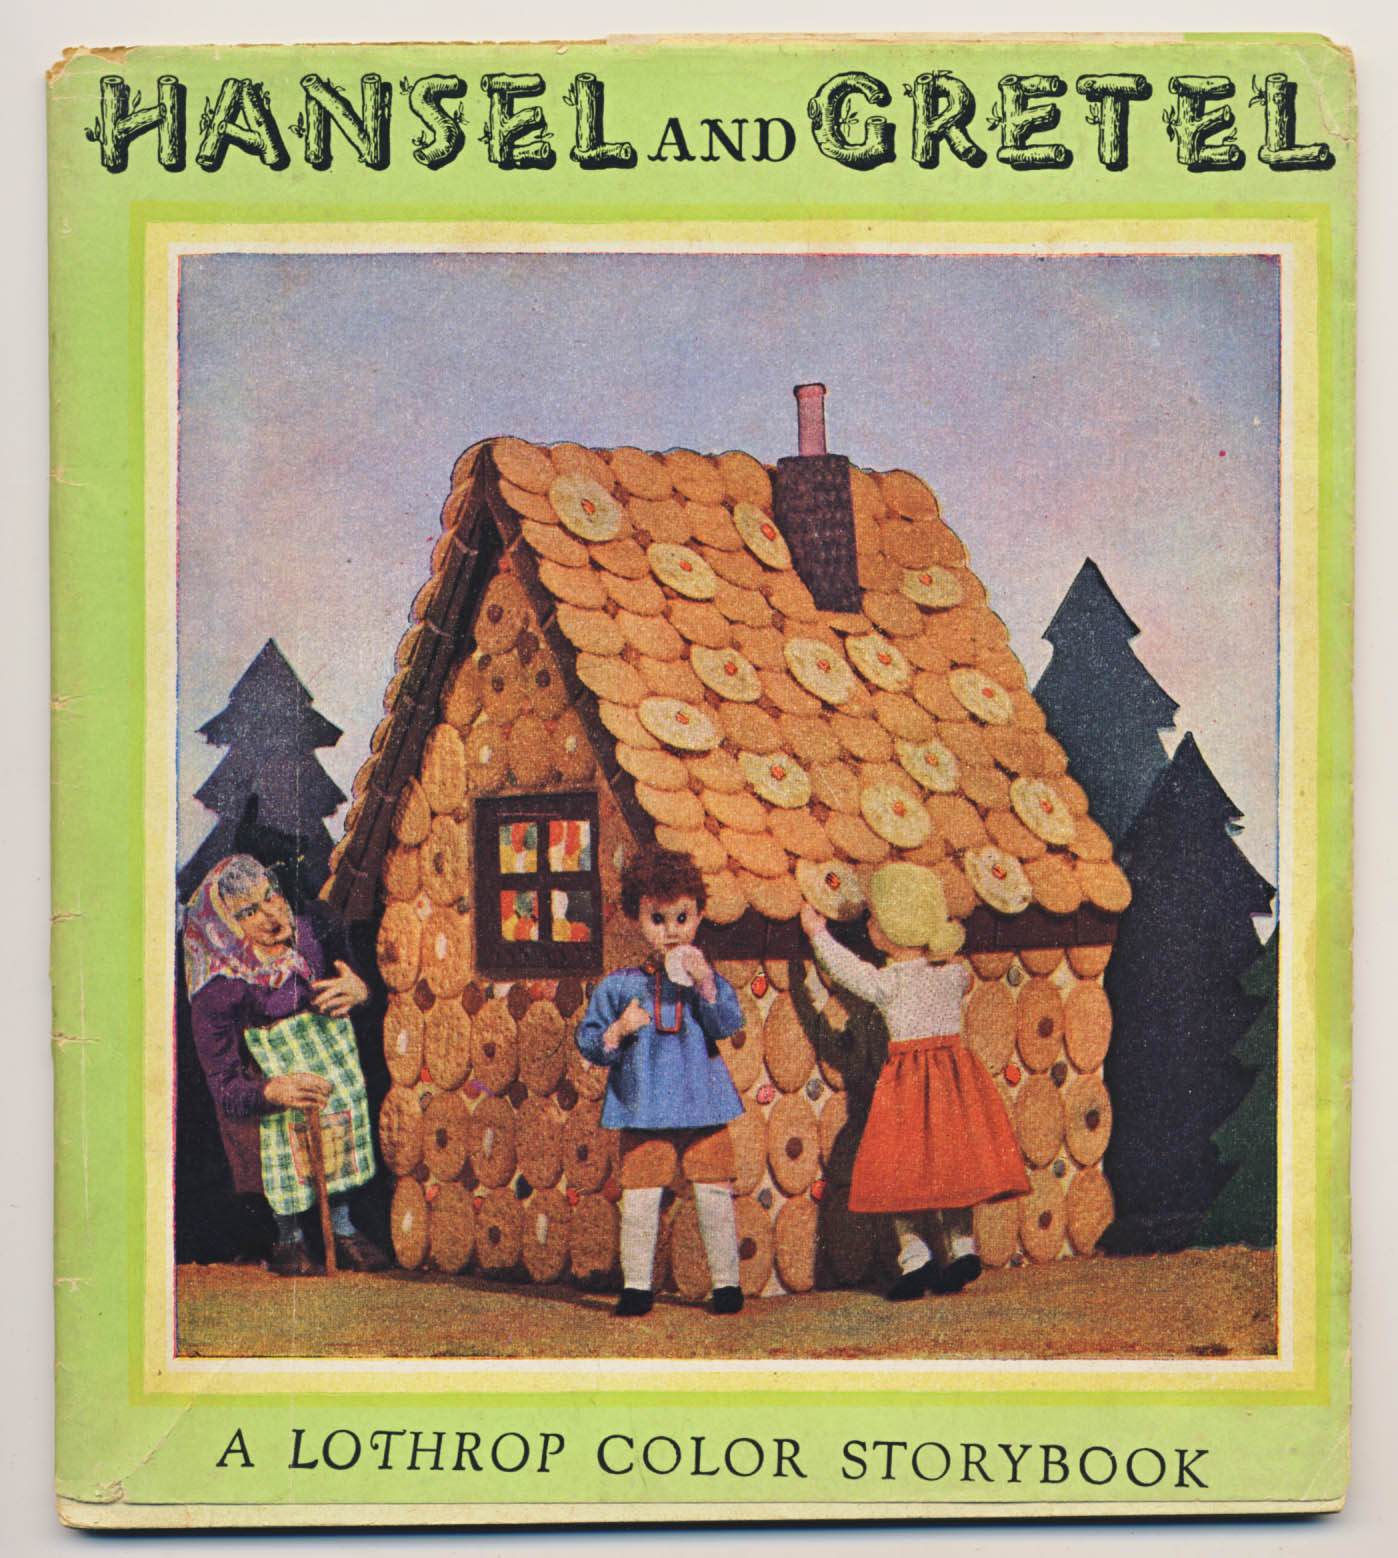 Sergio Ruzzier: The Story of Hansel and Gretel